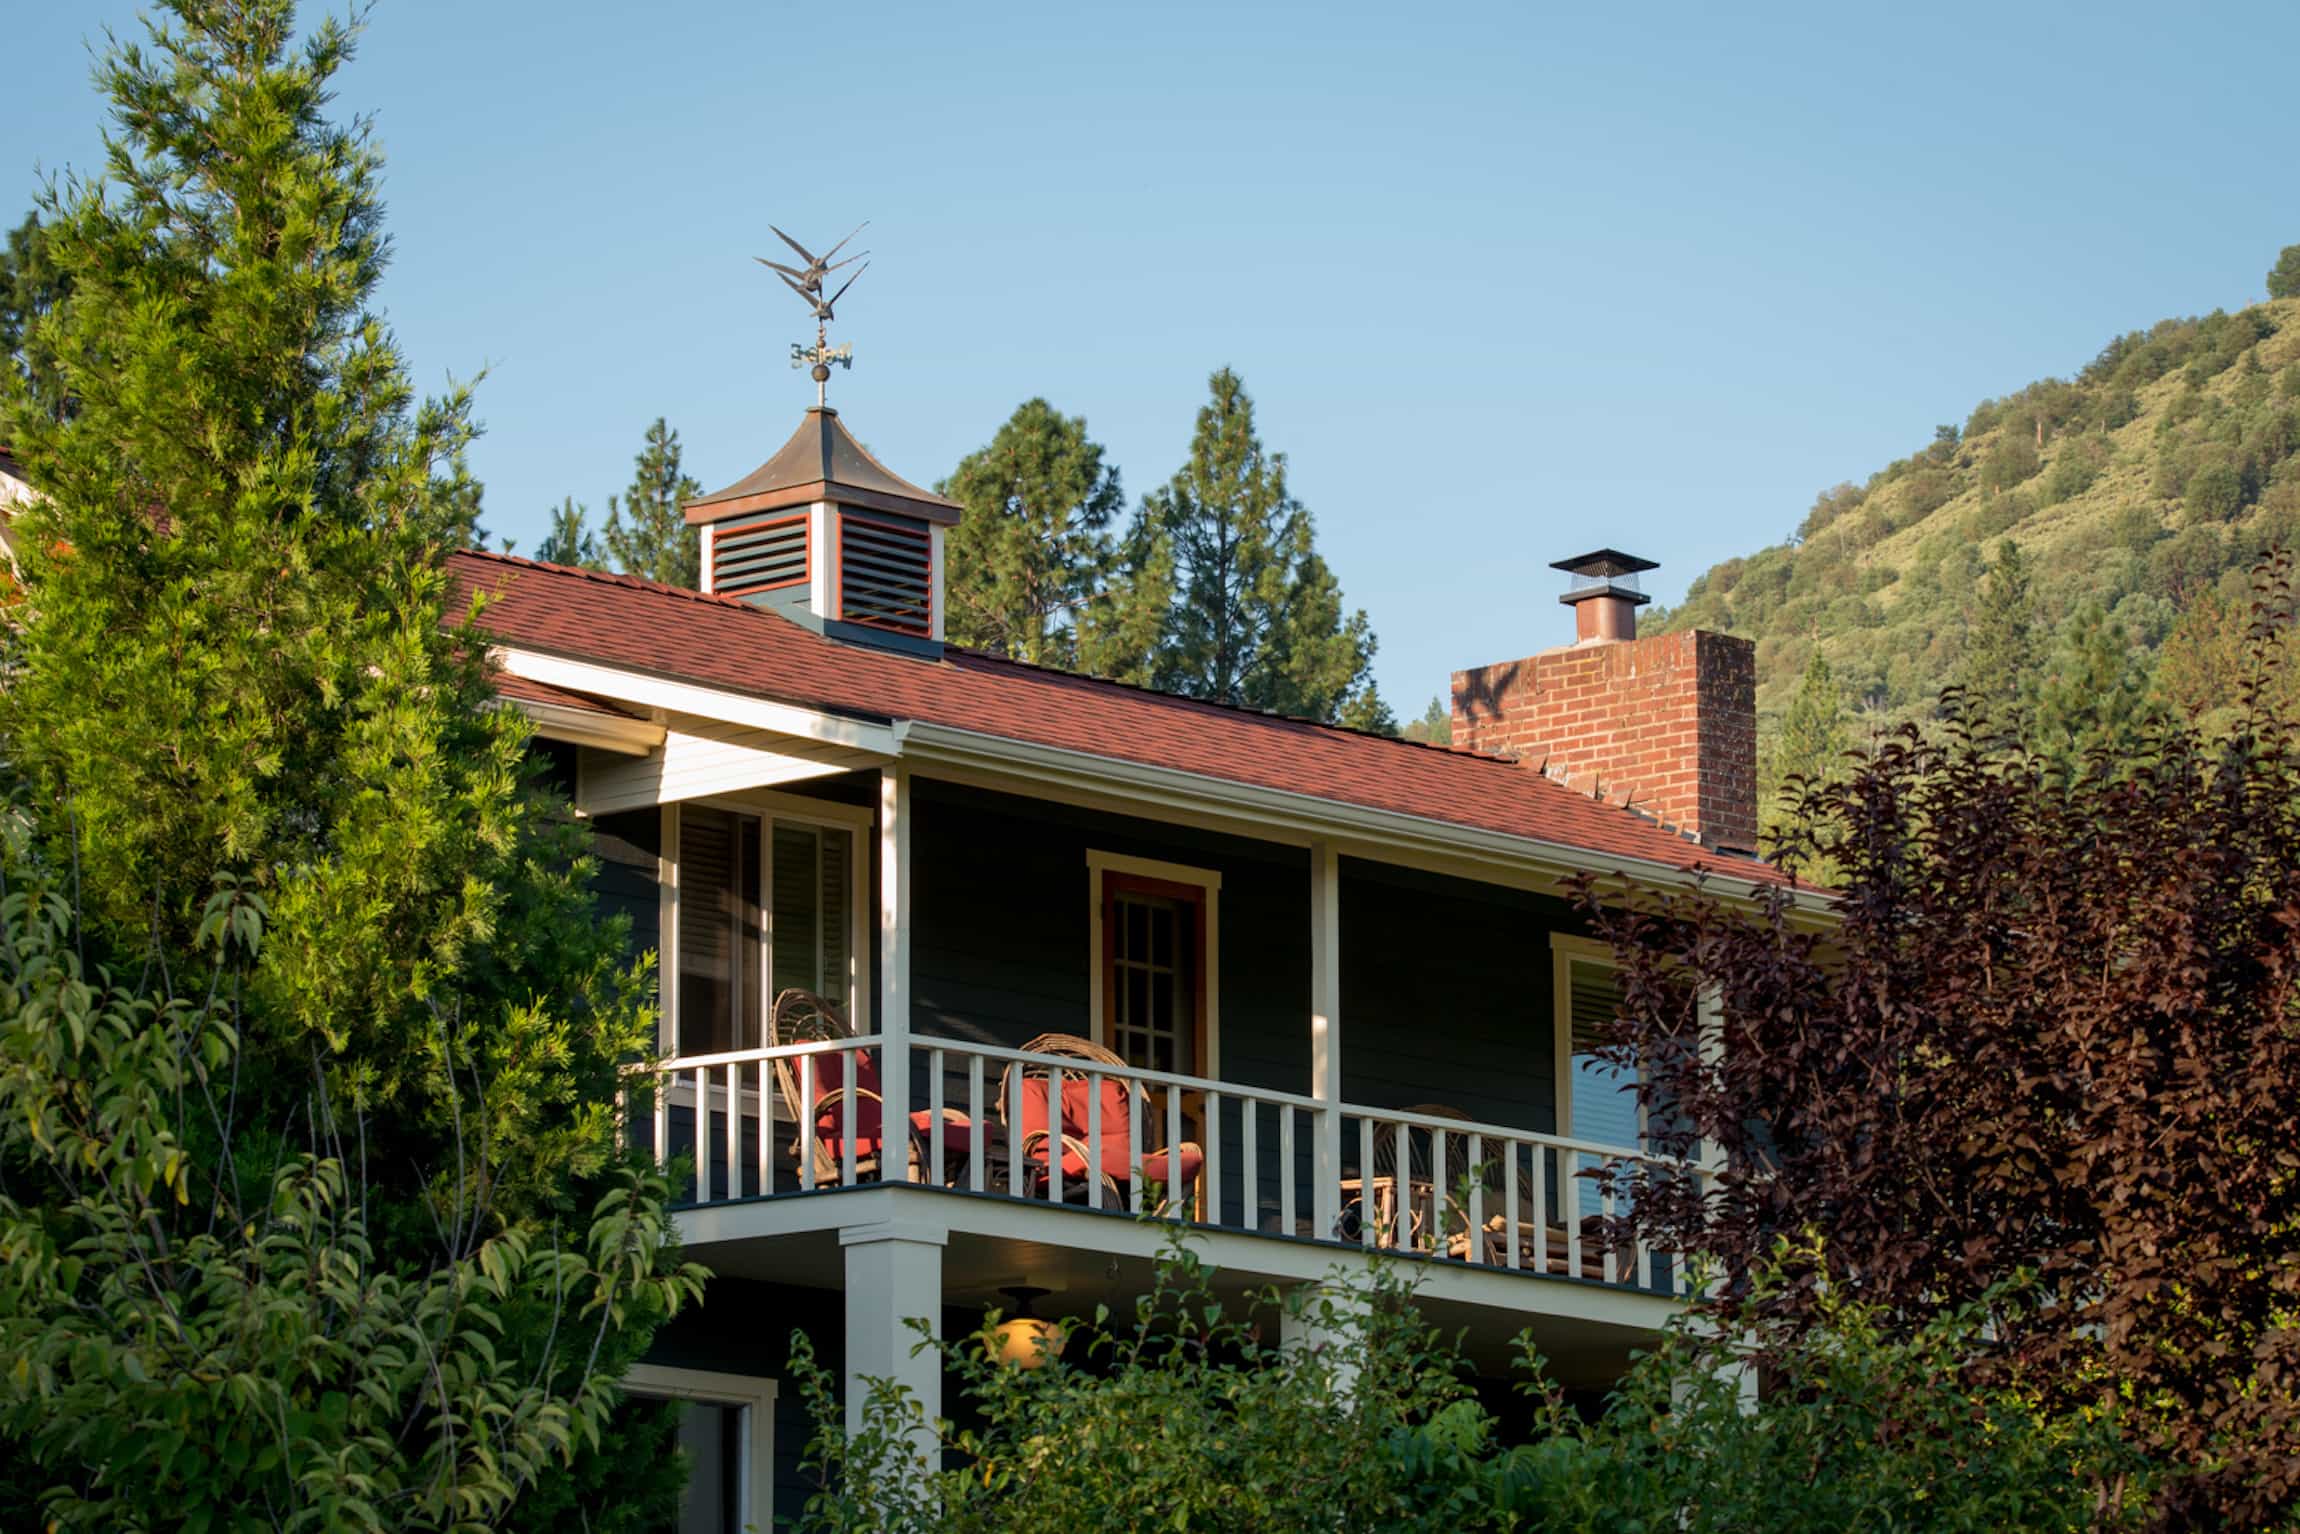 A view of Country Willows Inn & Estate in Ashland, Oregon, nestled on the mountainside, with comfortable covered porches overlooking the gardens.